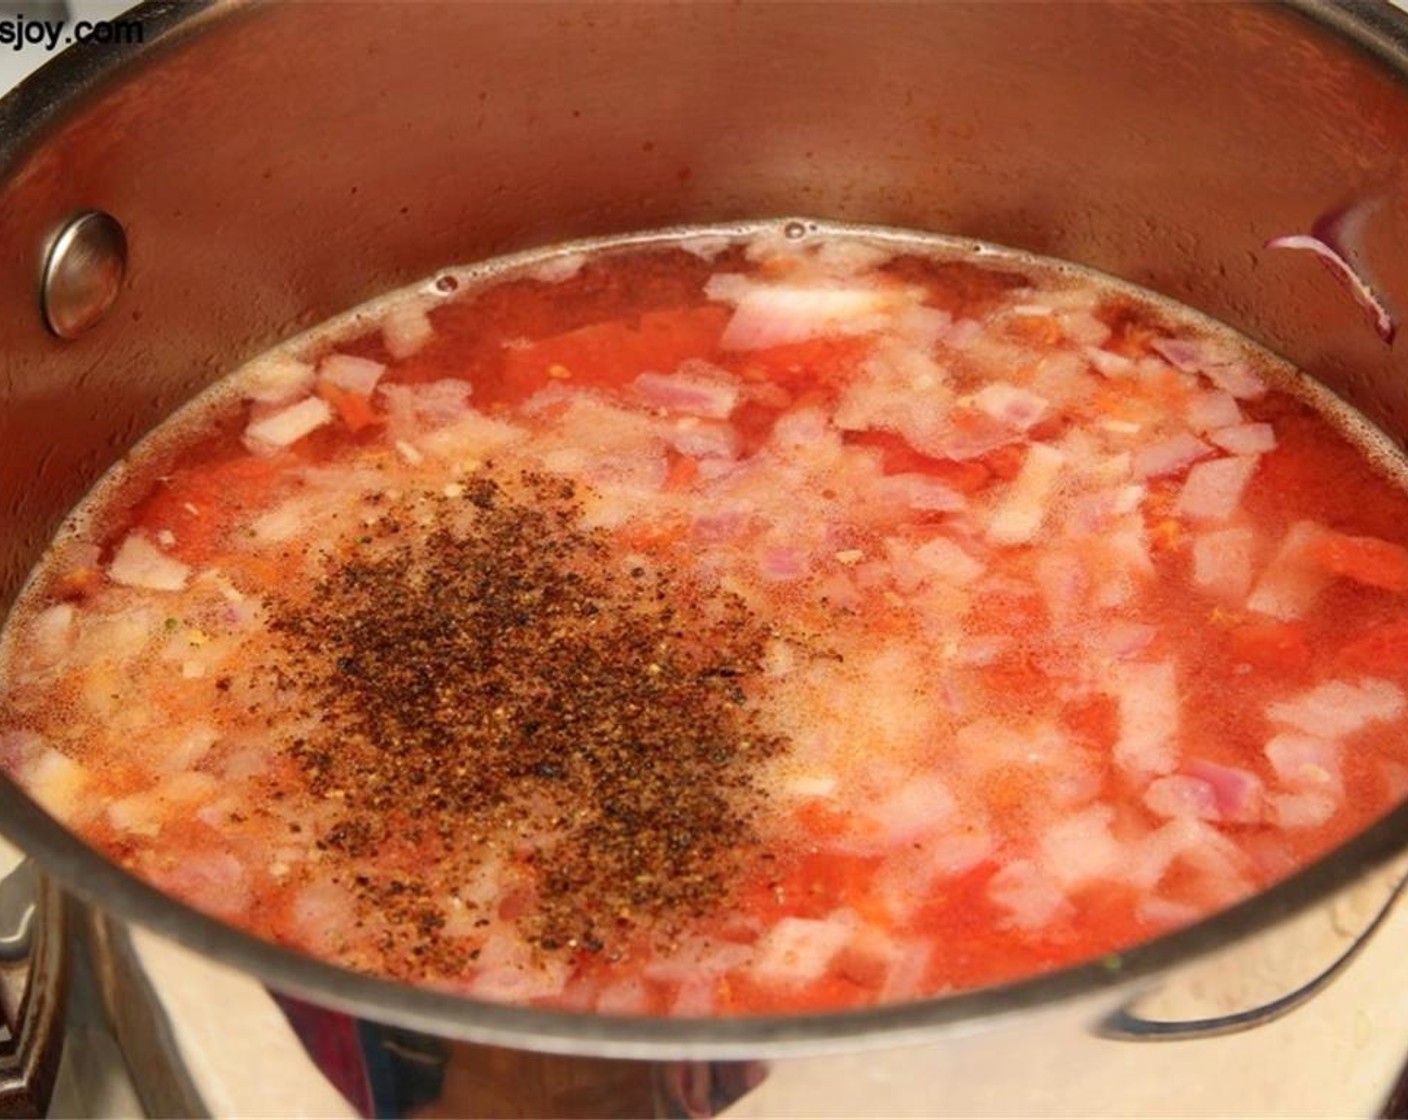 step 2 Add the Tomato (3/4 cup), Water (3 cups), Salt (to taste) and Ground Black Pepper (to taste). Bring to a boil.